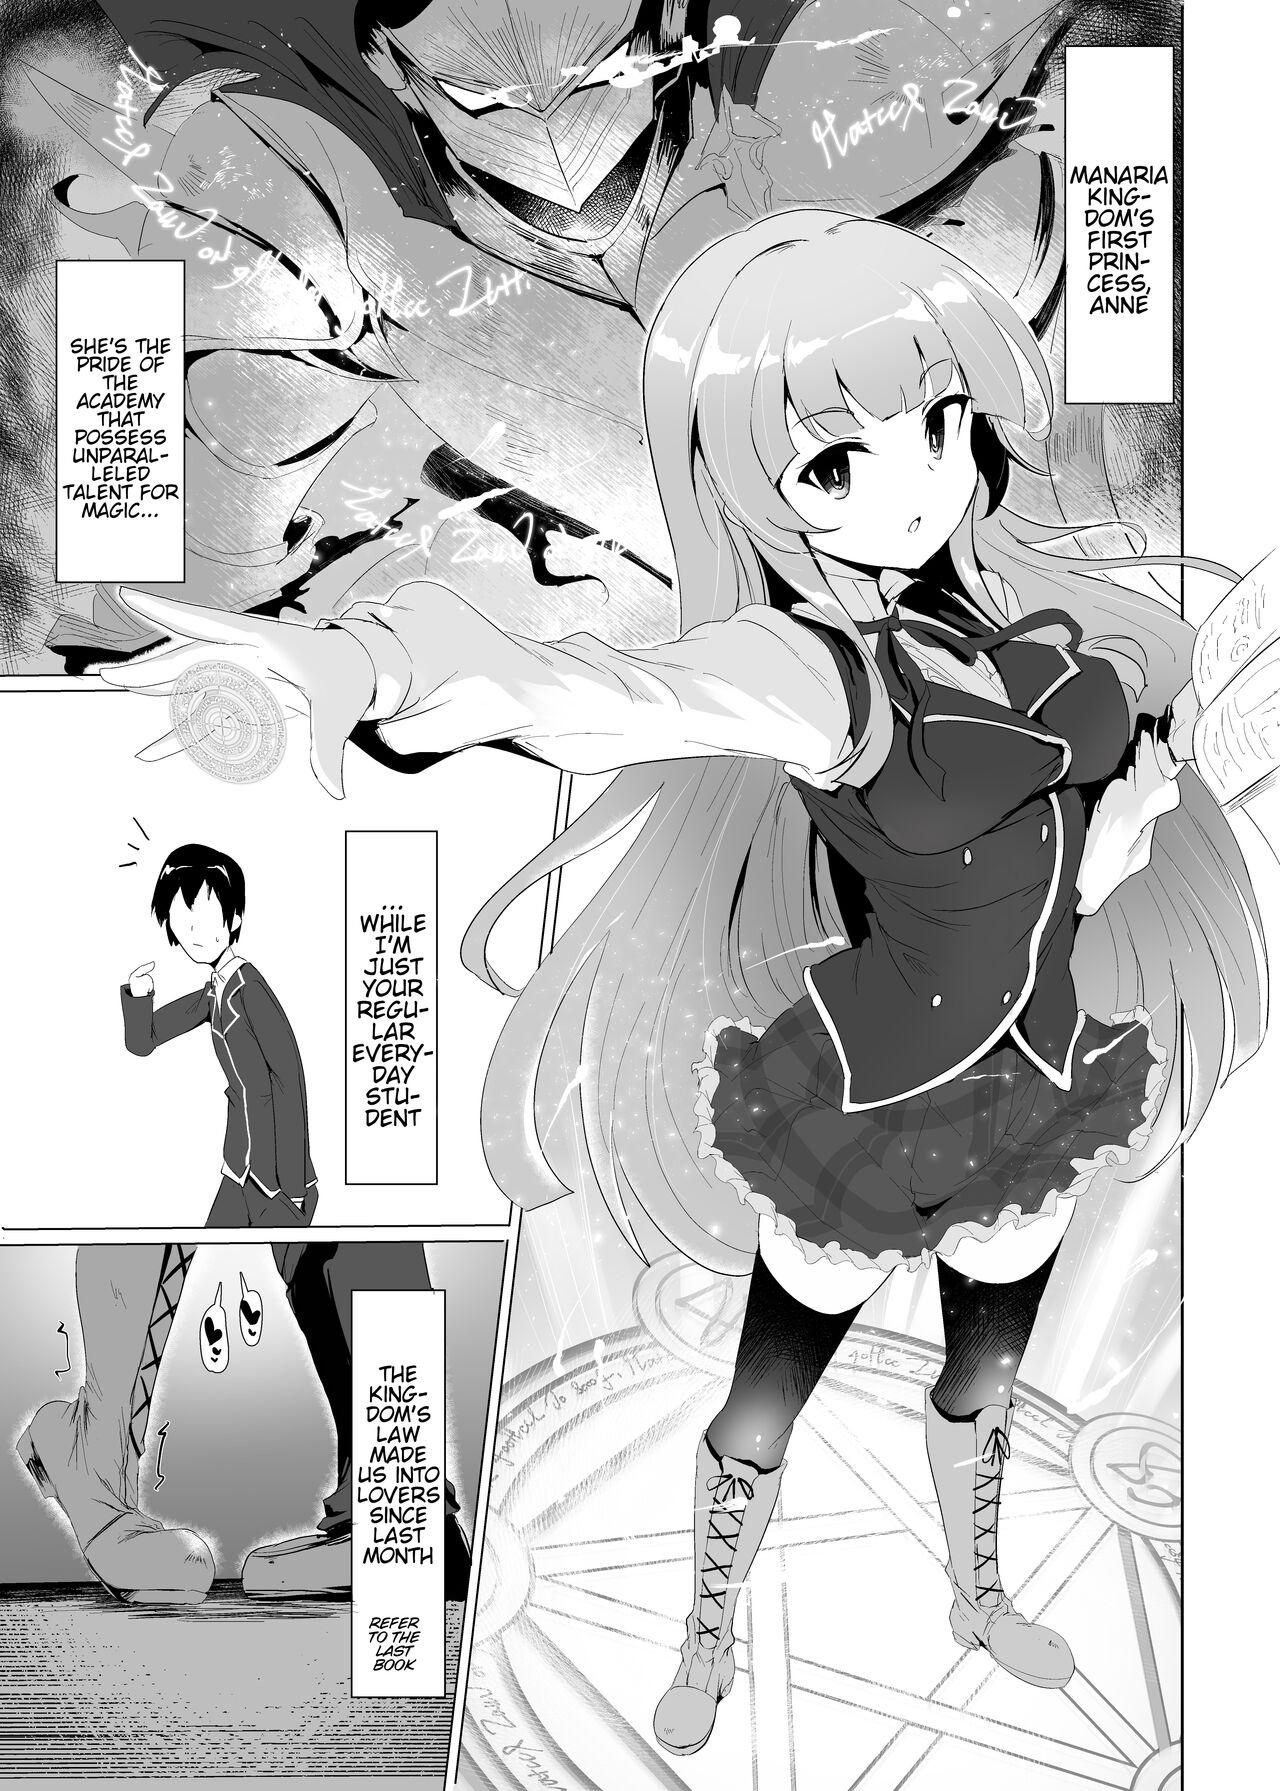 Real There's No Way An Ecchi Event Will Happen Between Me and the Princess of Manaria Kingdom! 2 - Manaria friends Hair - Page 5